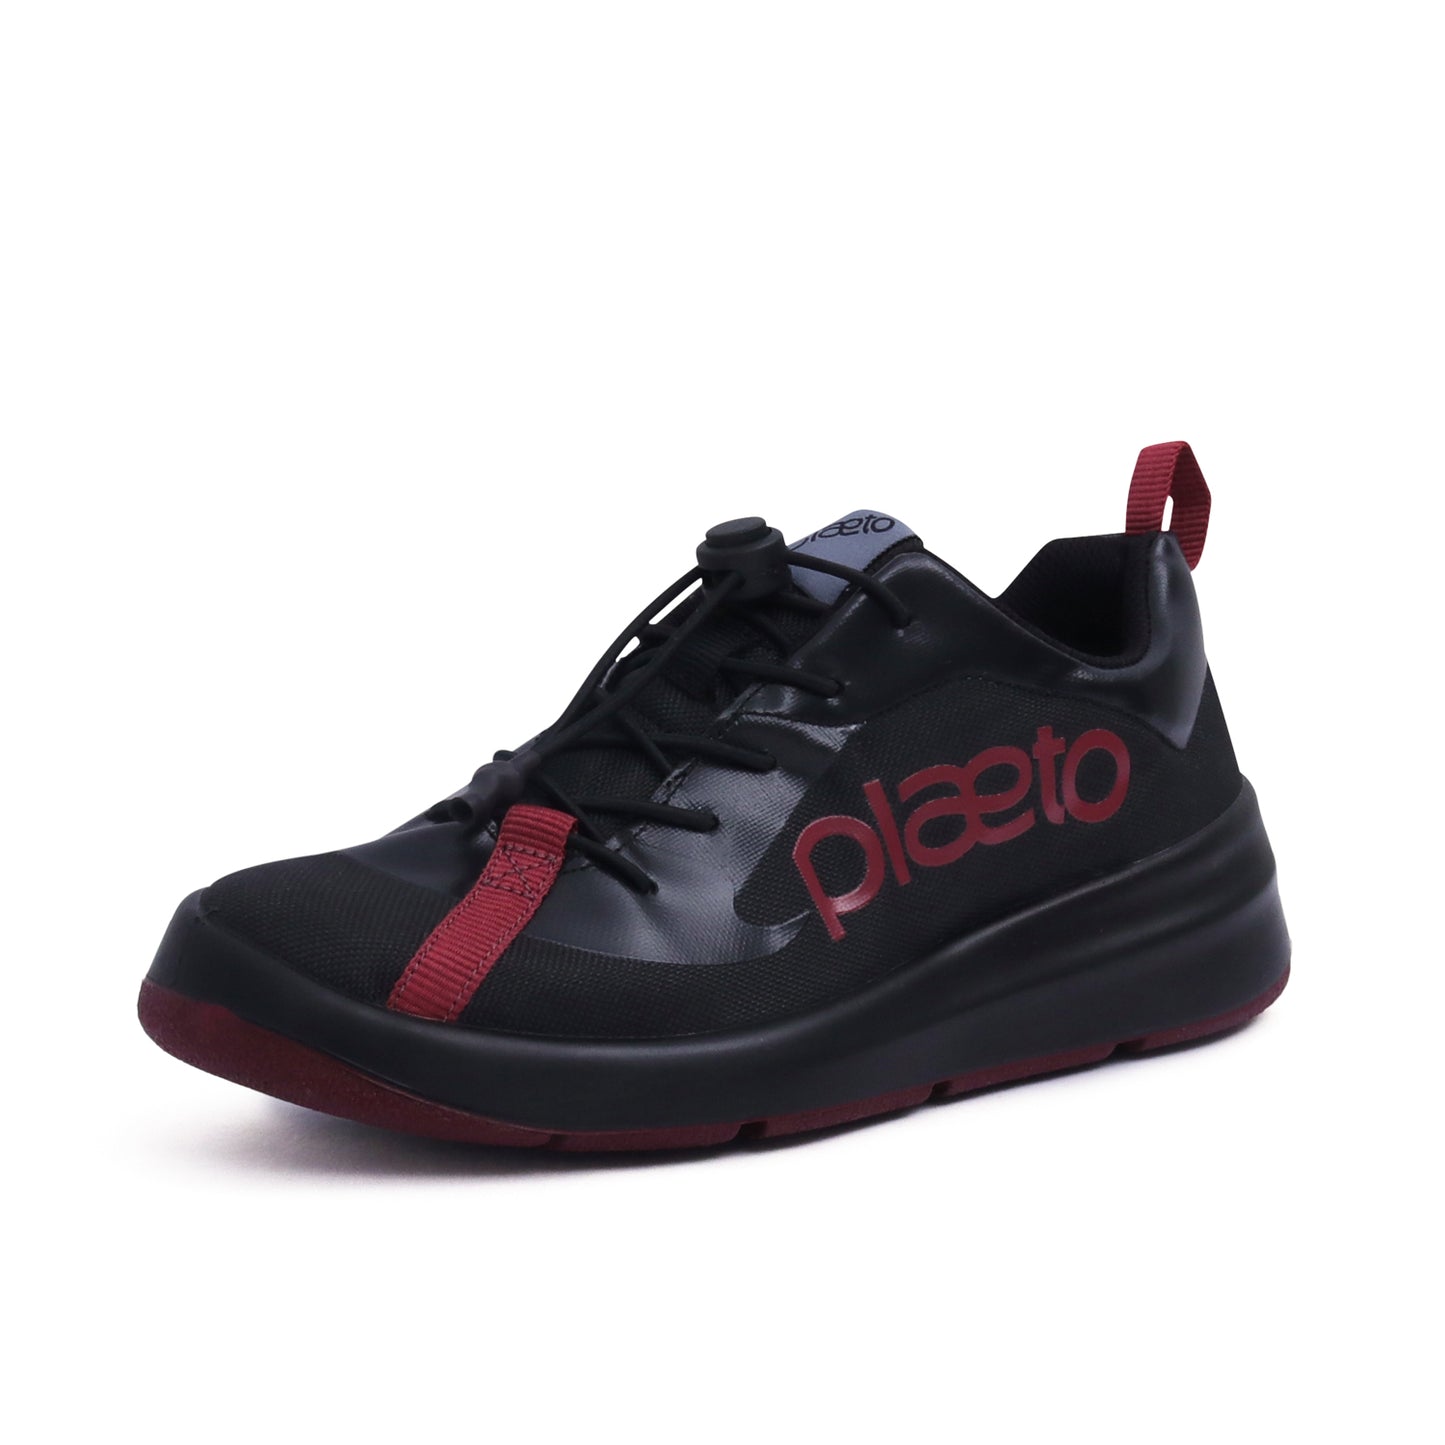 Hurricane Kids Multiplay Sports Shoes - Black / Red